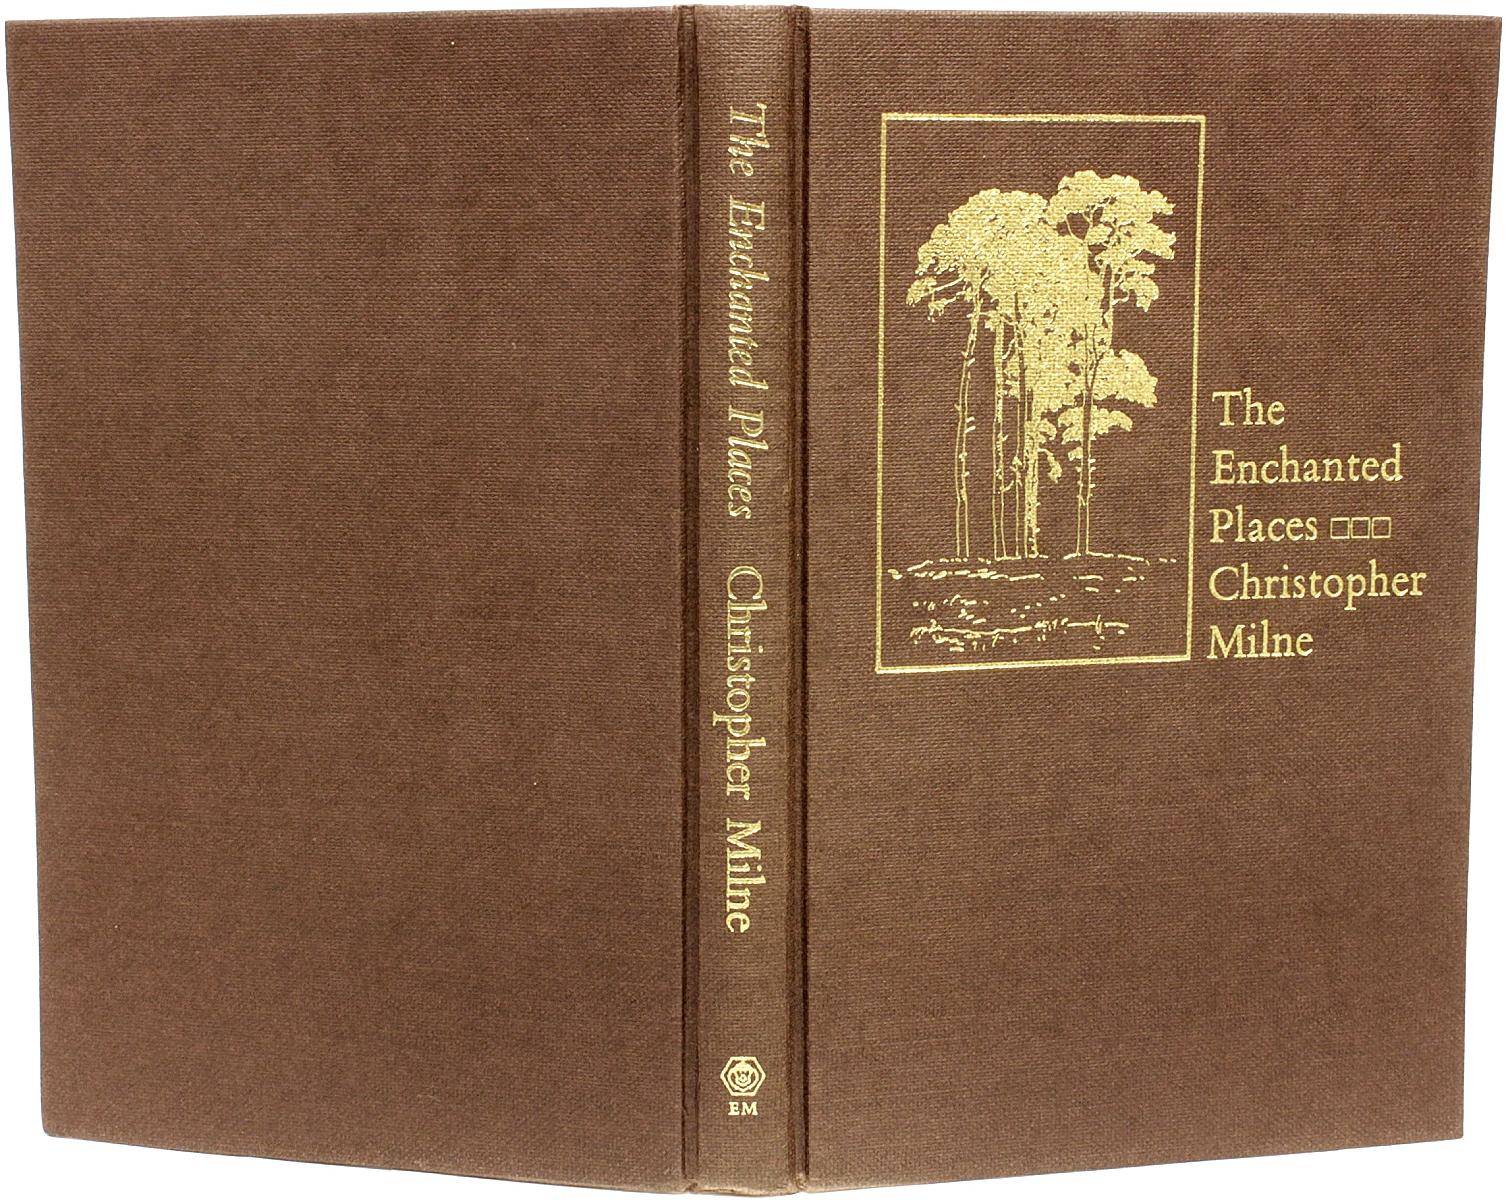 Christopher Milne. Enchanted Places, 1st Ed Inscribed by Milne & His Nanny, 1974 For Sale 2